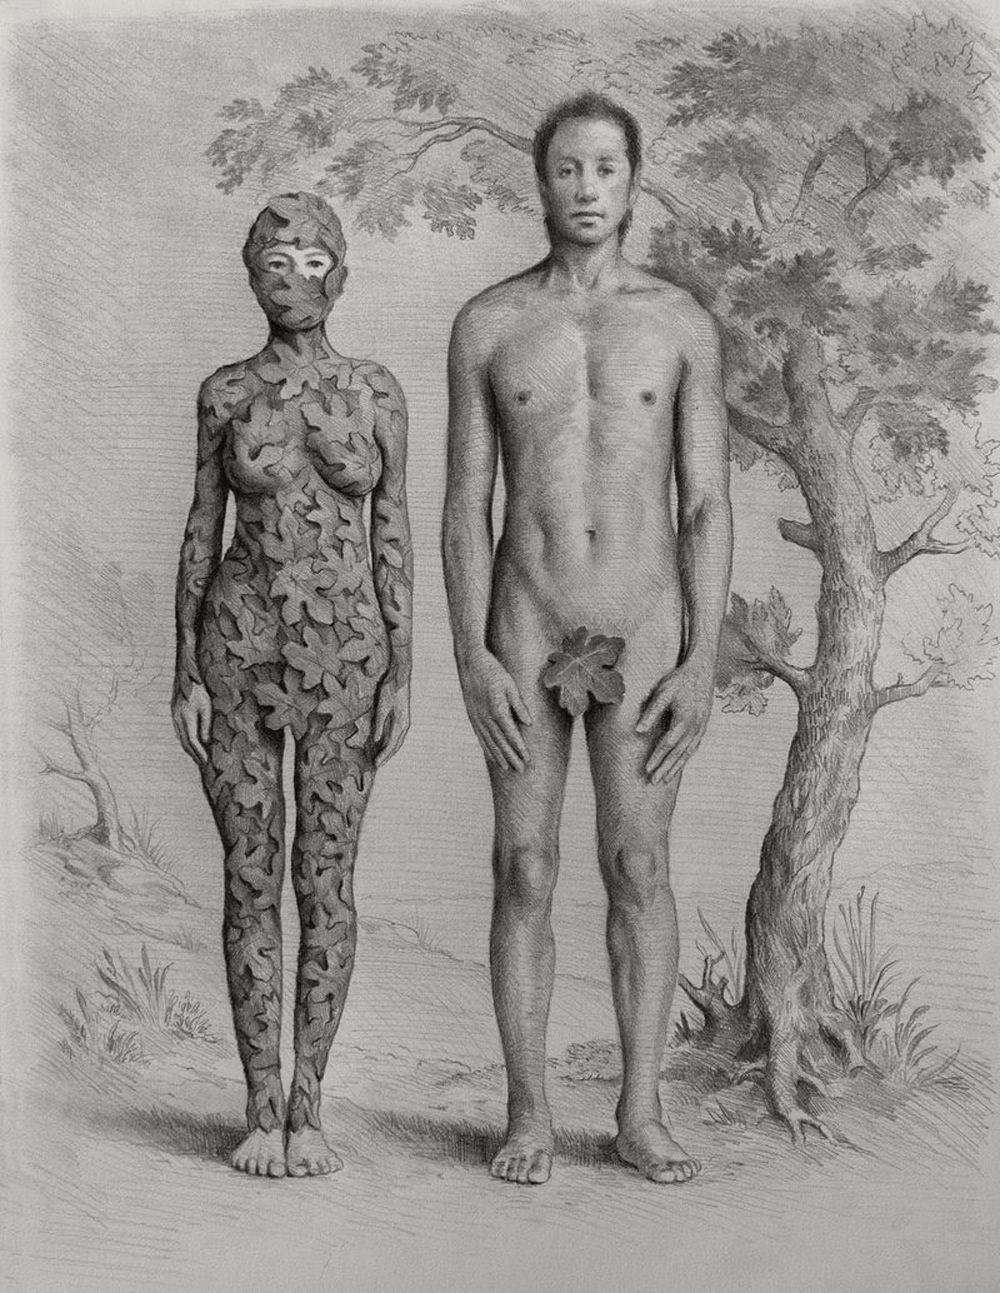 "Adam And Eve" by Raoof Haghighi c/o A Gallery, London, UK